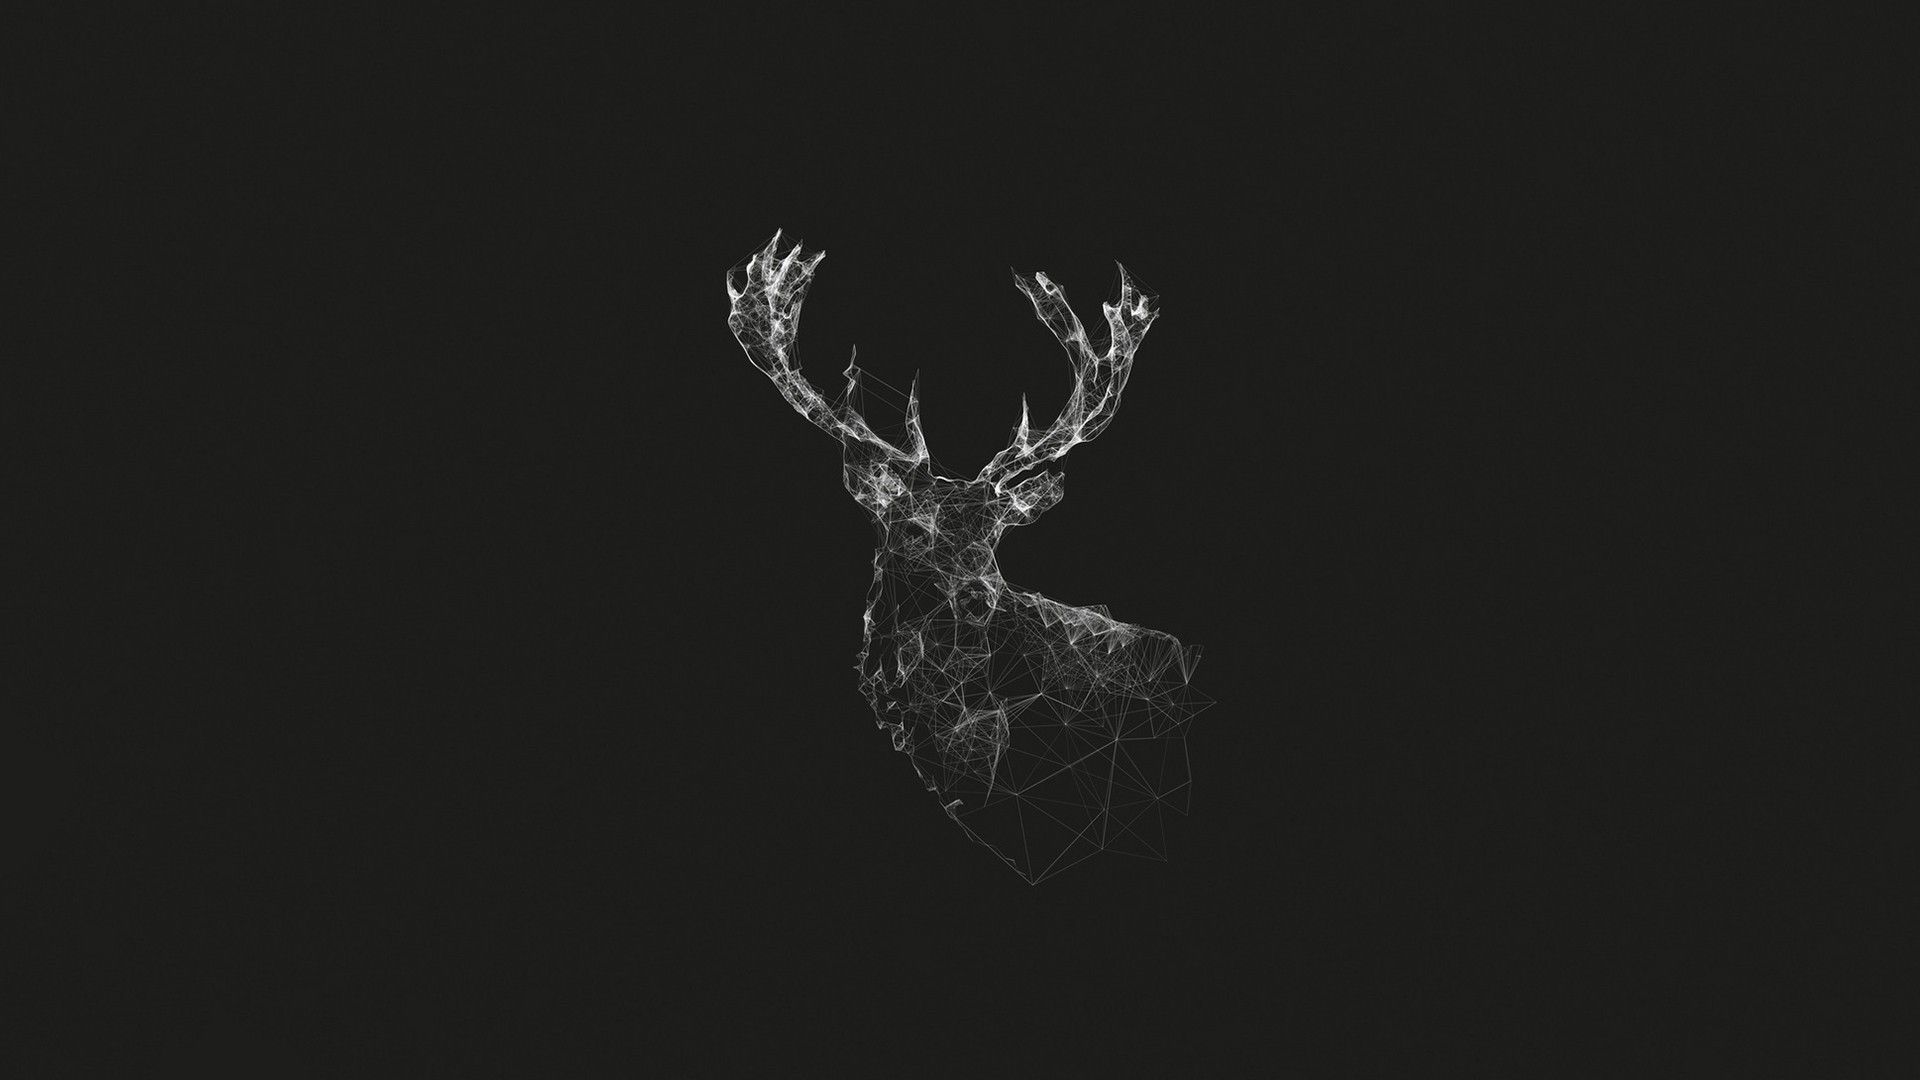 A digital image of a deer head made up of lines and dots - Deer